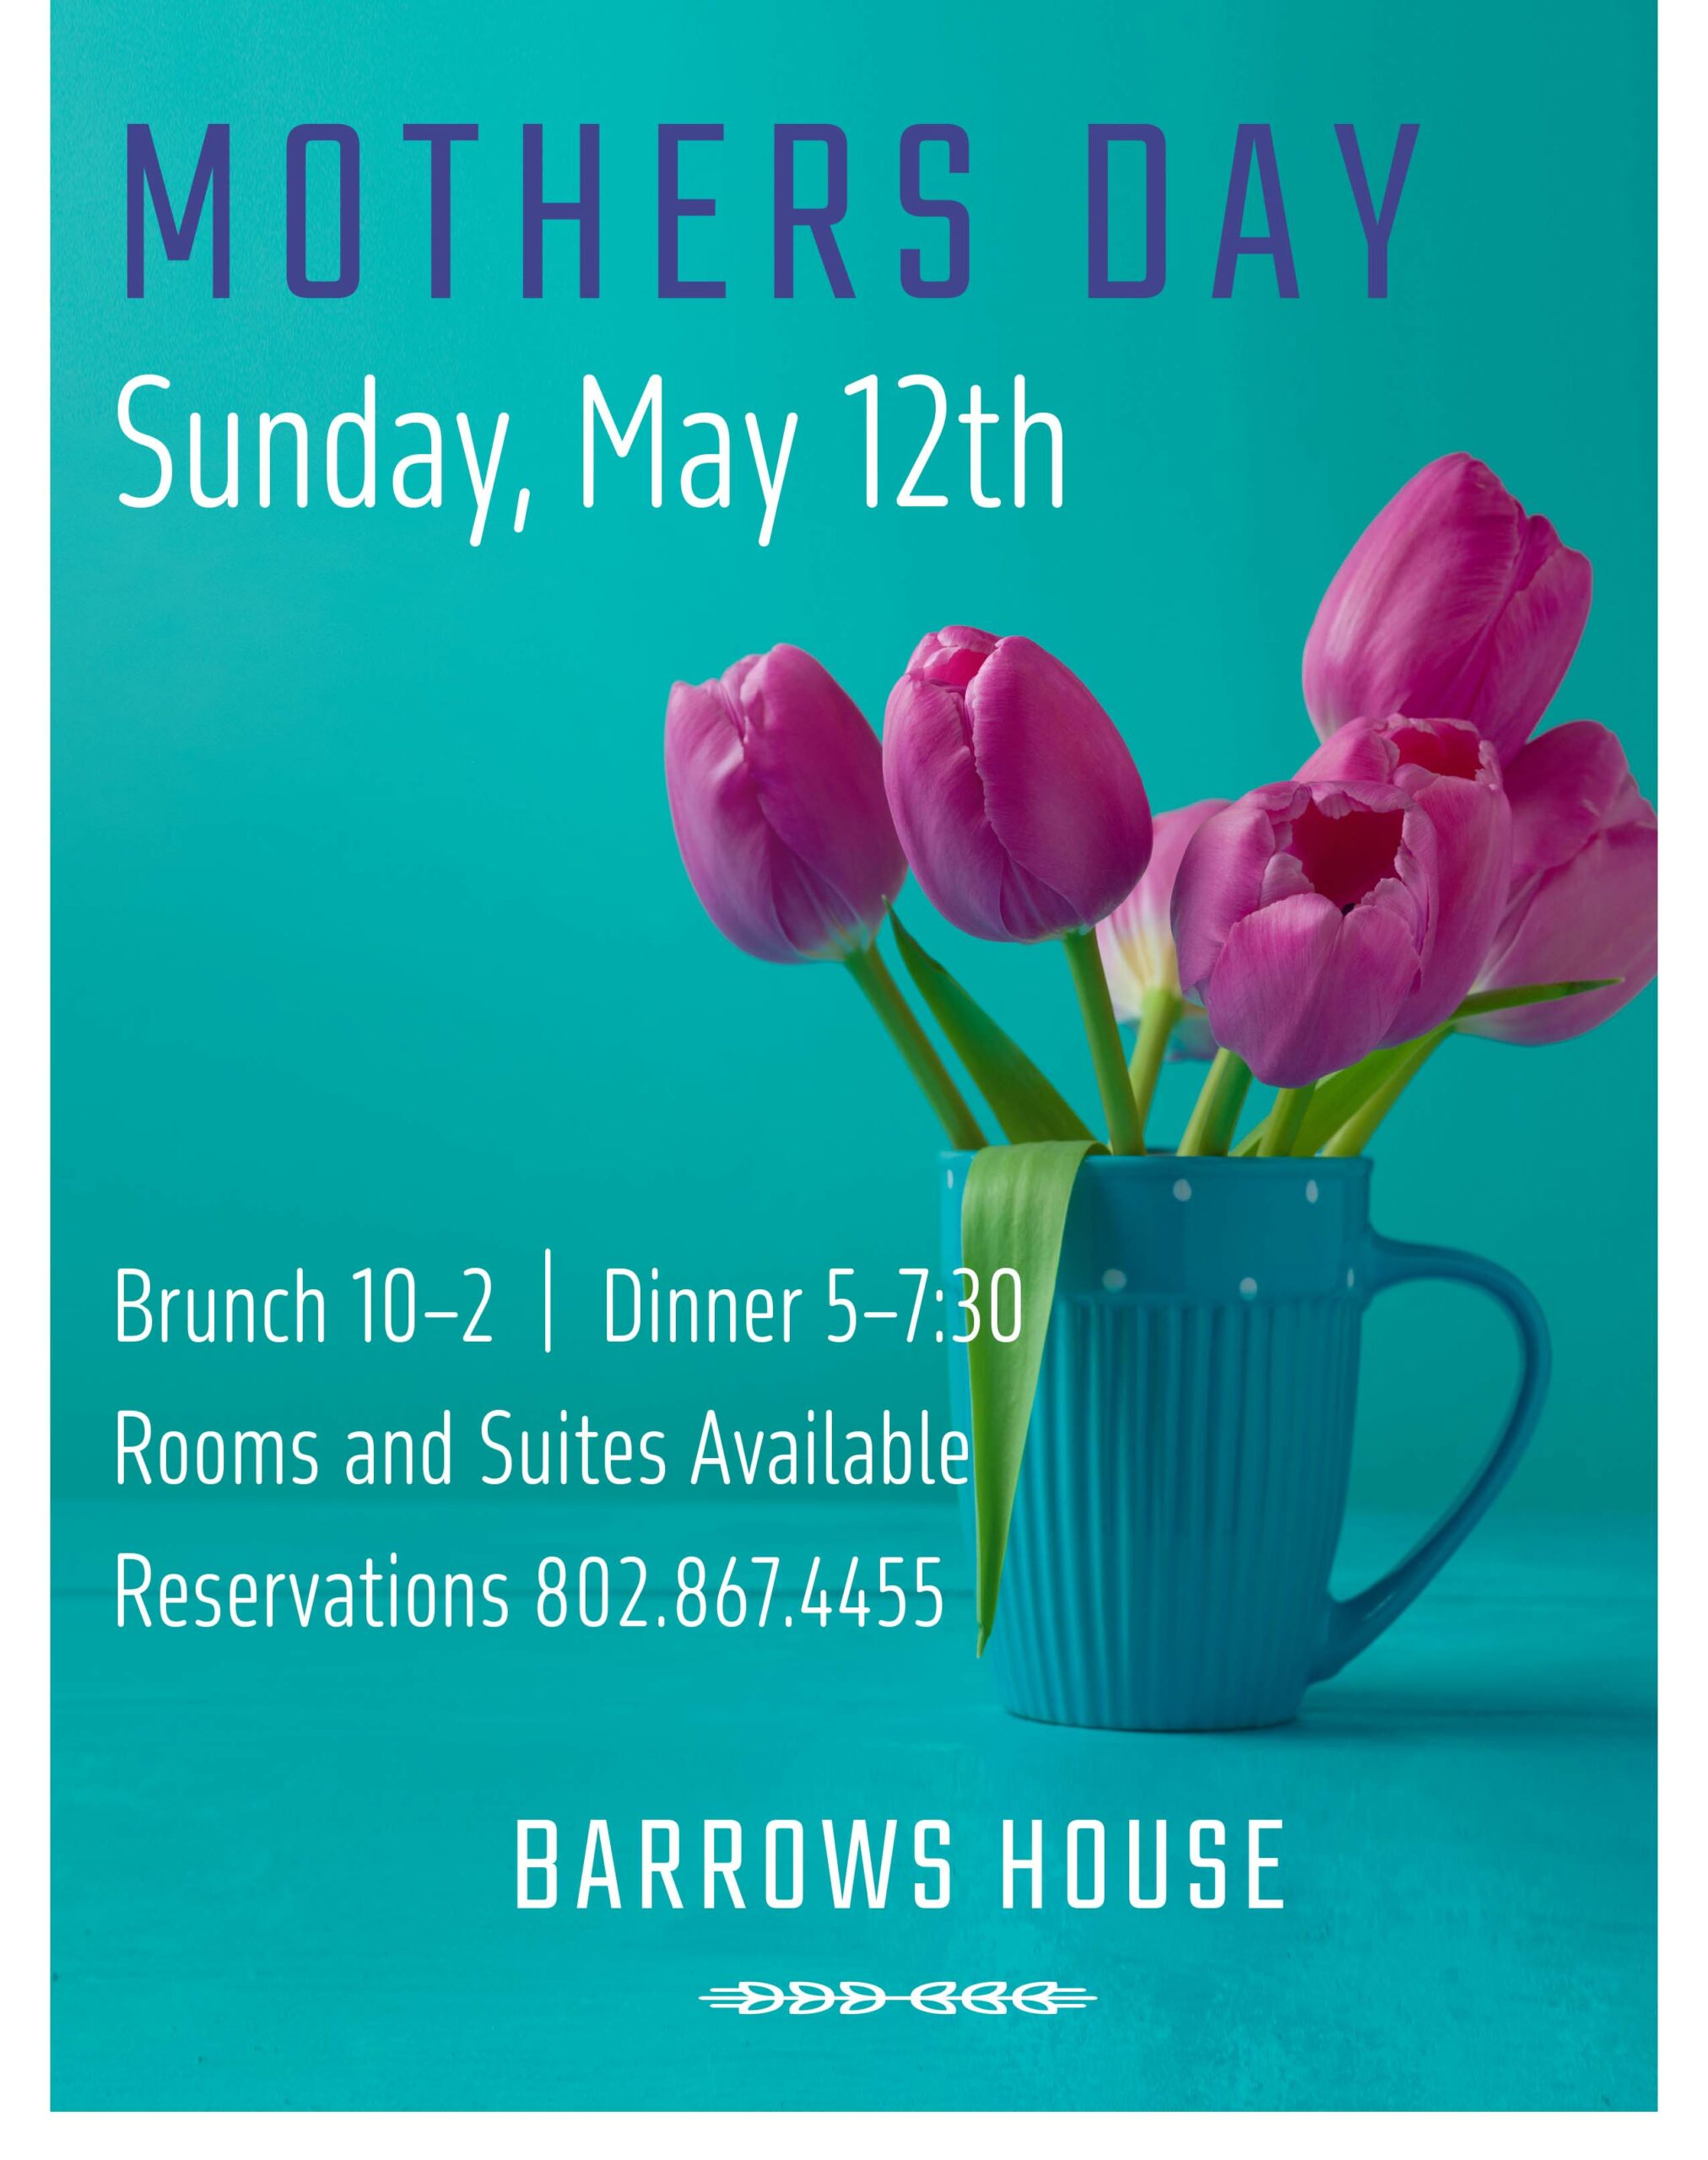 Mother’s Day at Barrows House